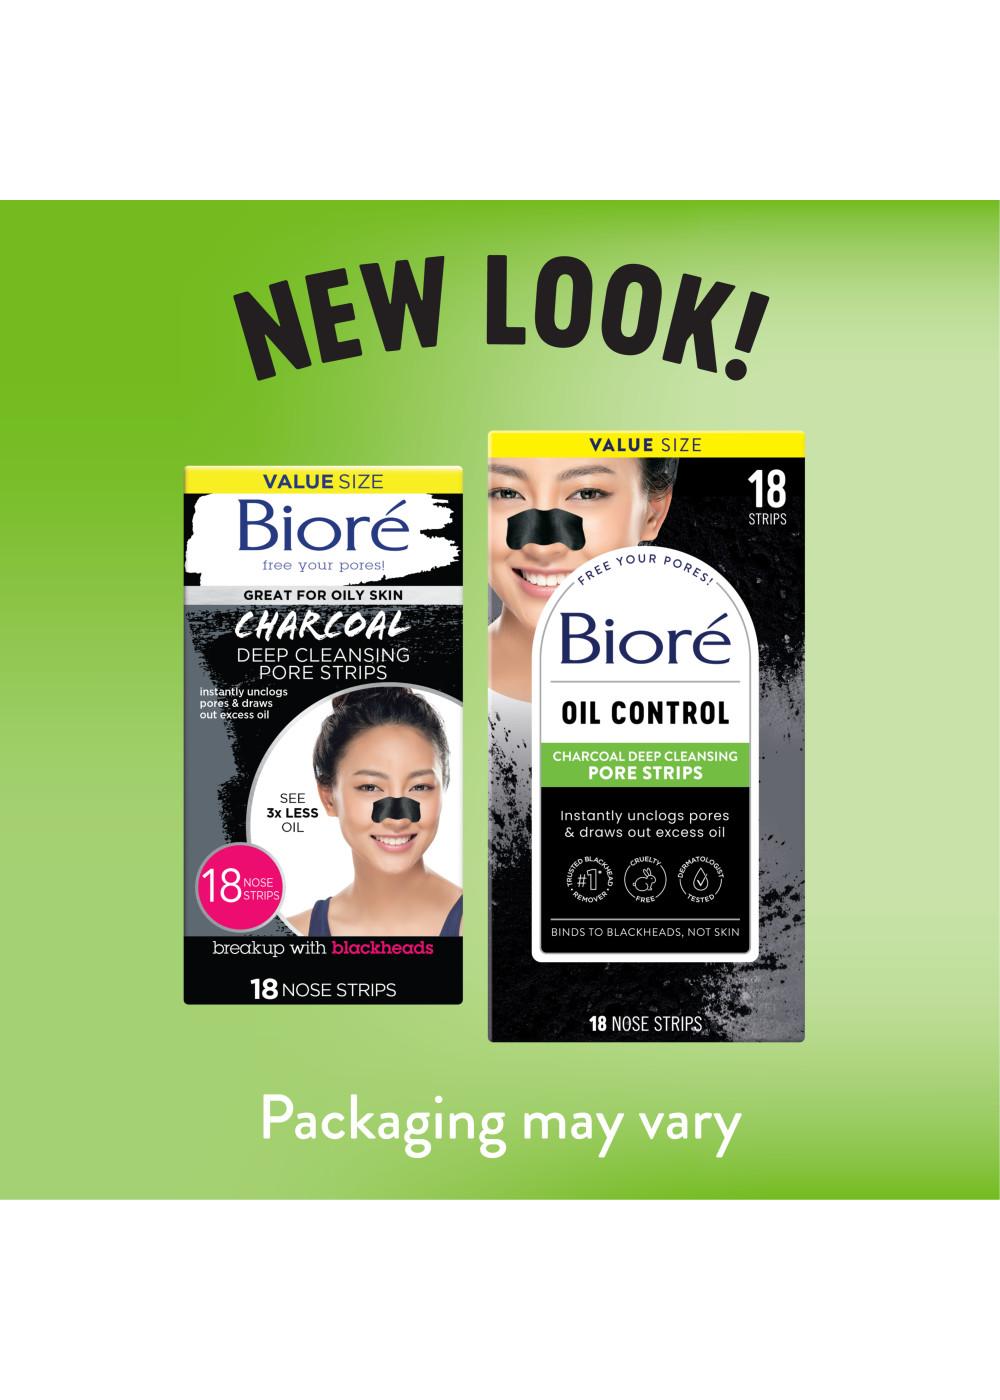 Bioré Oil Control Charcoal Deep Cleansing Pore Strips; image 9 of 10